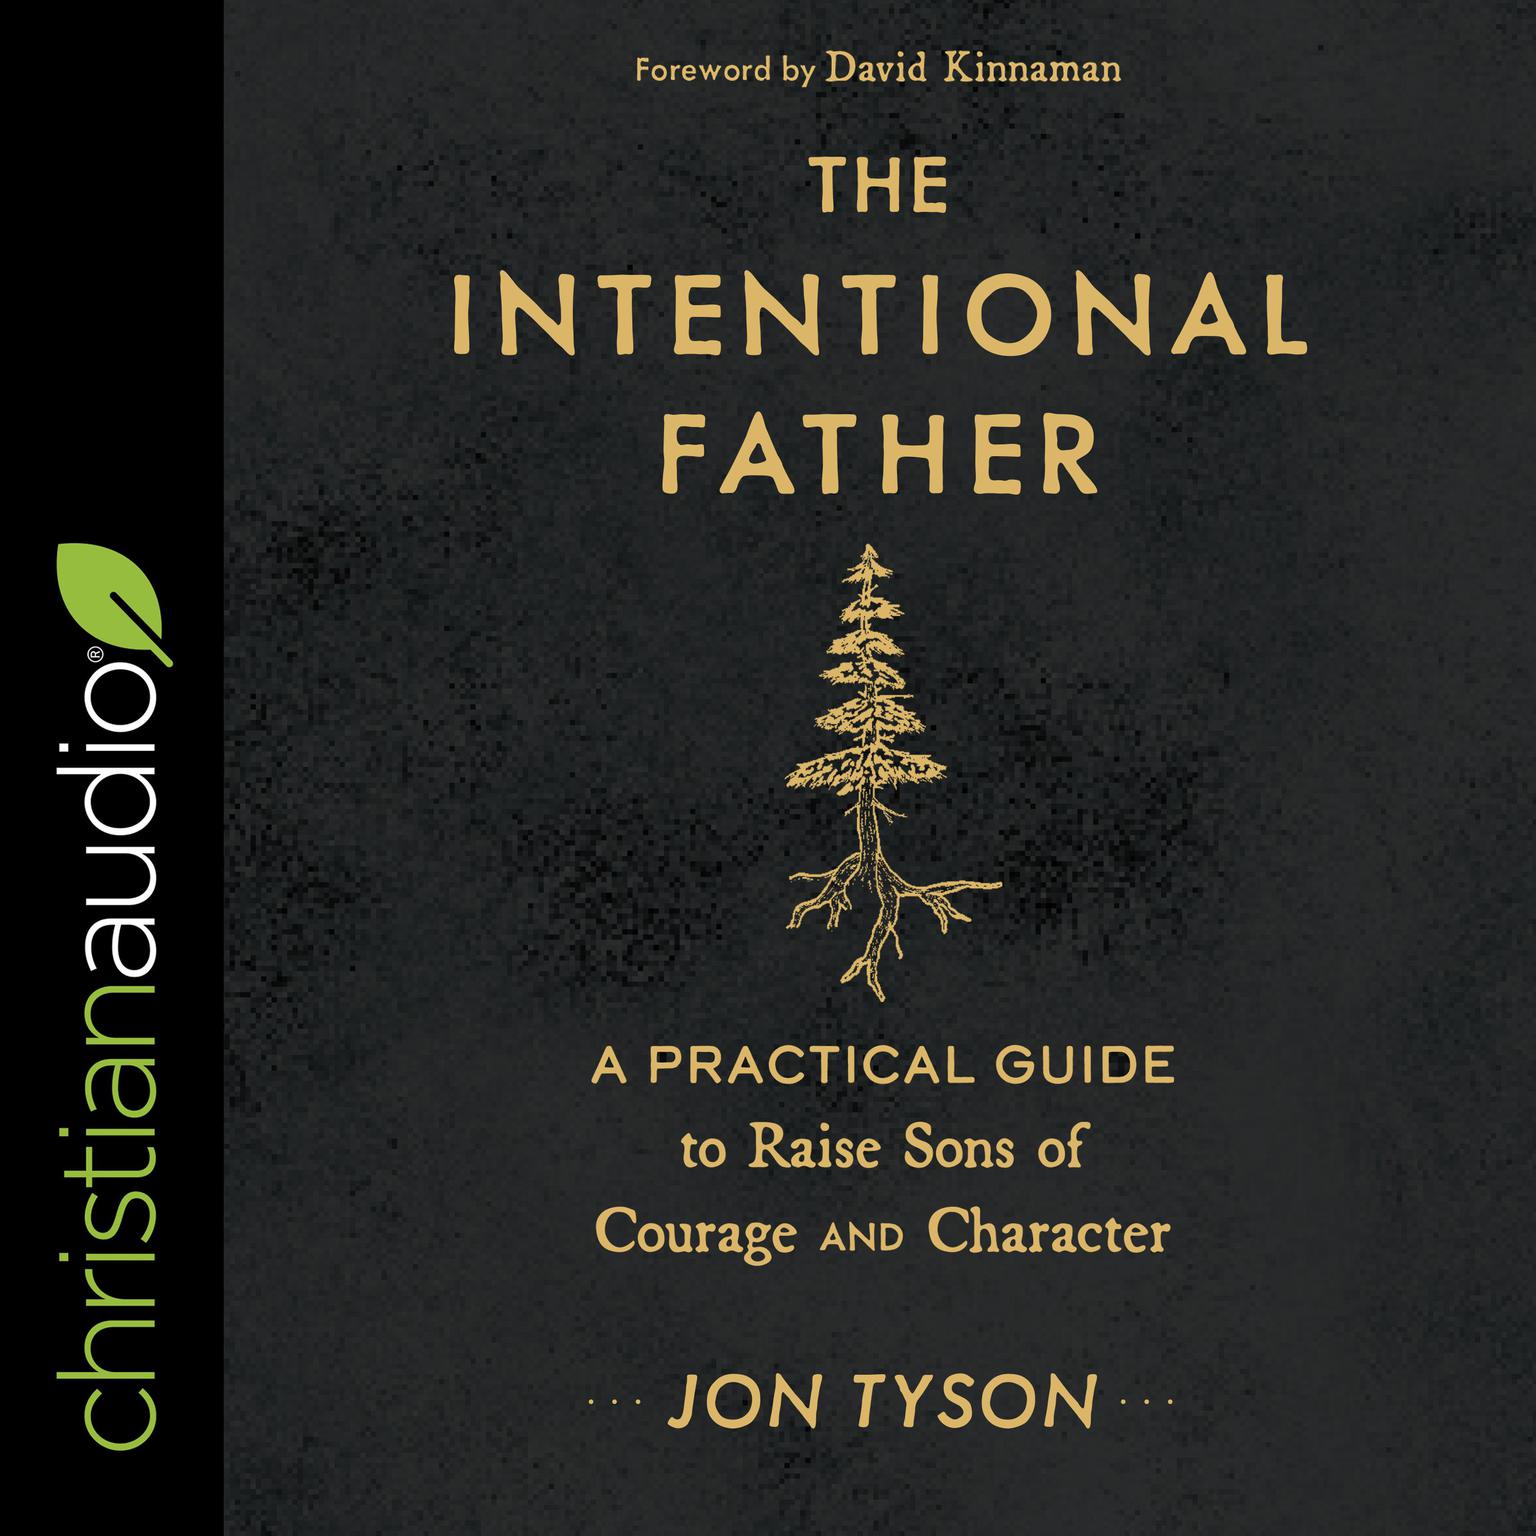 The Intentional Father: A Practical Guide to Raise Sons of Courage and Character Audiobook, by Jon Tyson